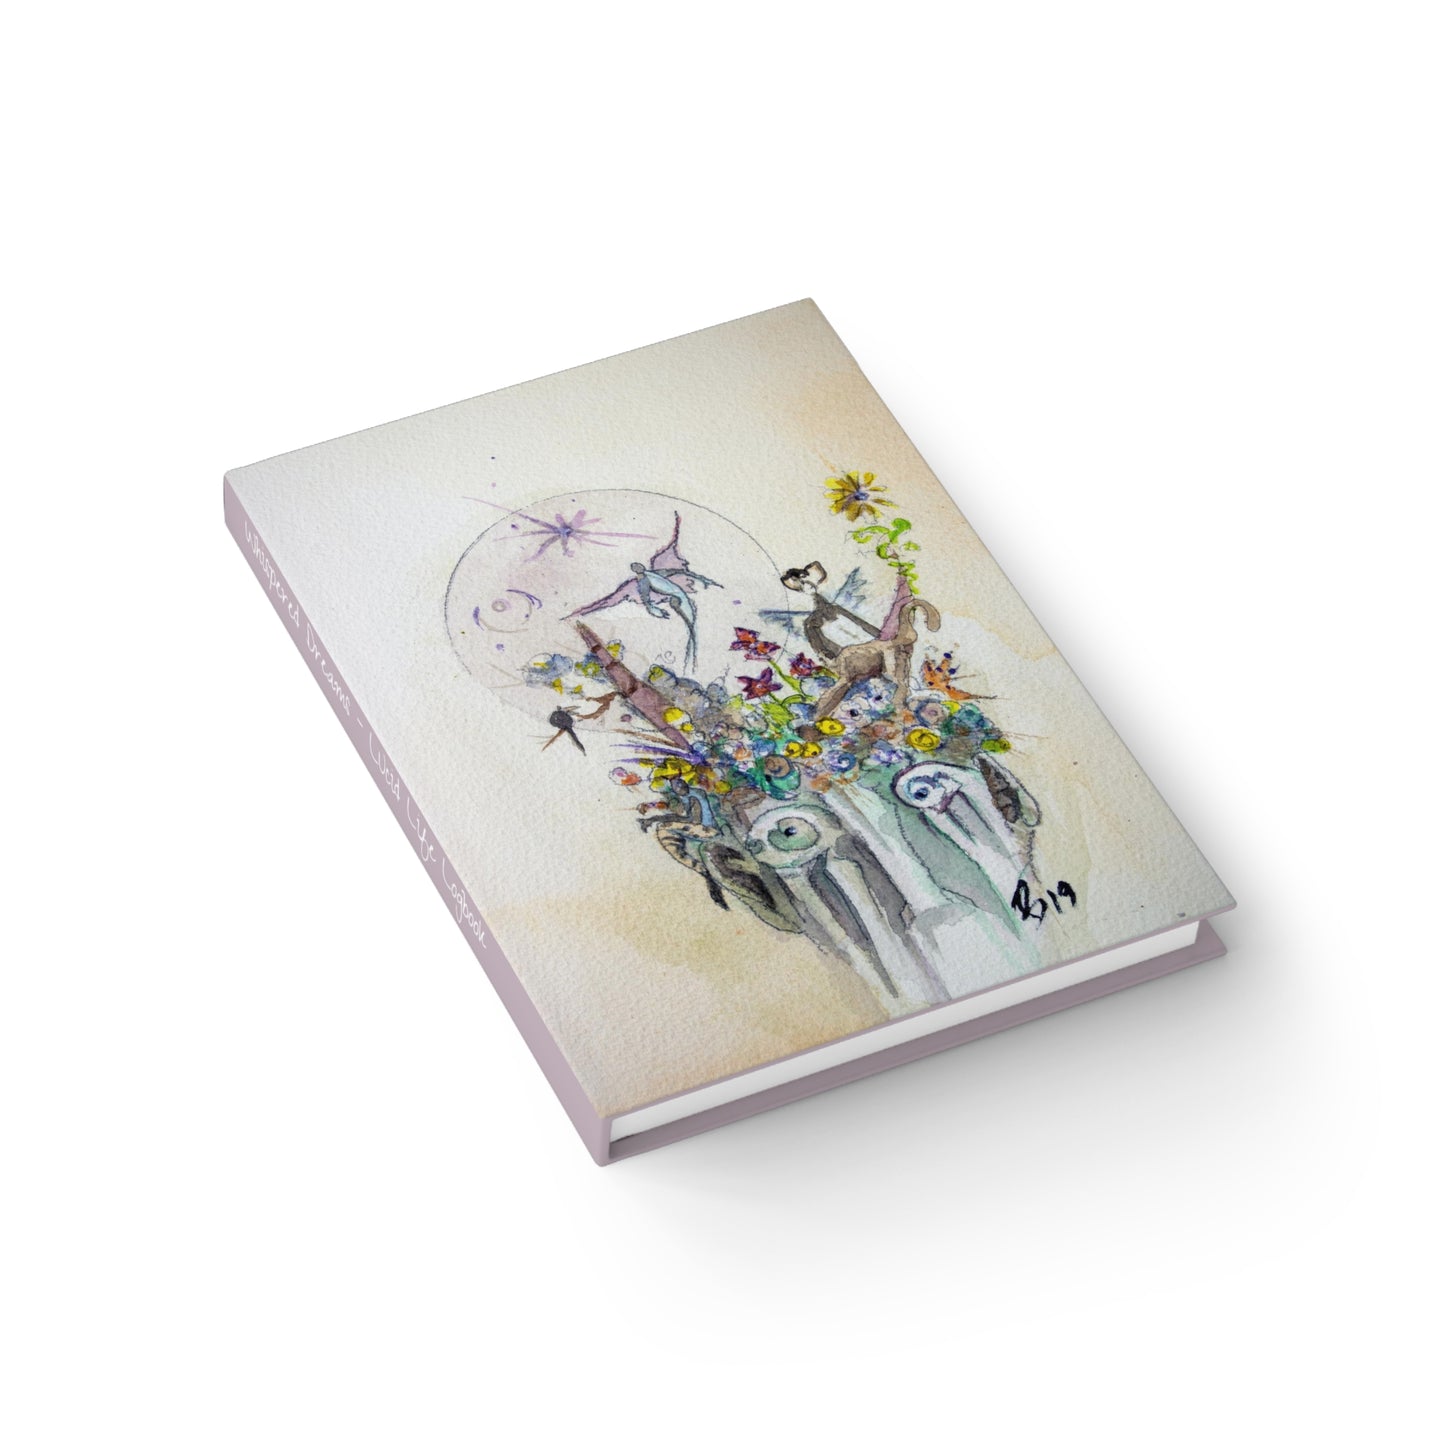 Whispered Dreams Lucid Life Logbook - J. Wesley Bailey IV Watercolor Art, 128 Blank Pages, Dream Journal & Creative Notebook, Hardcover